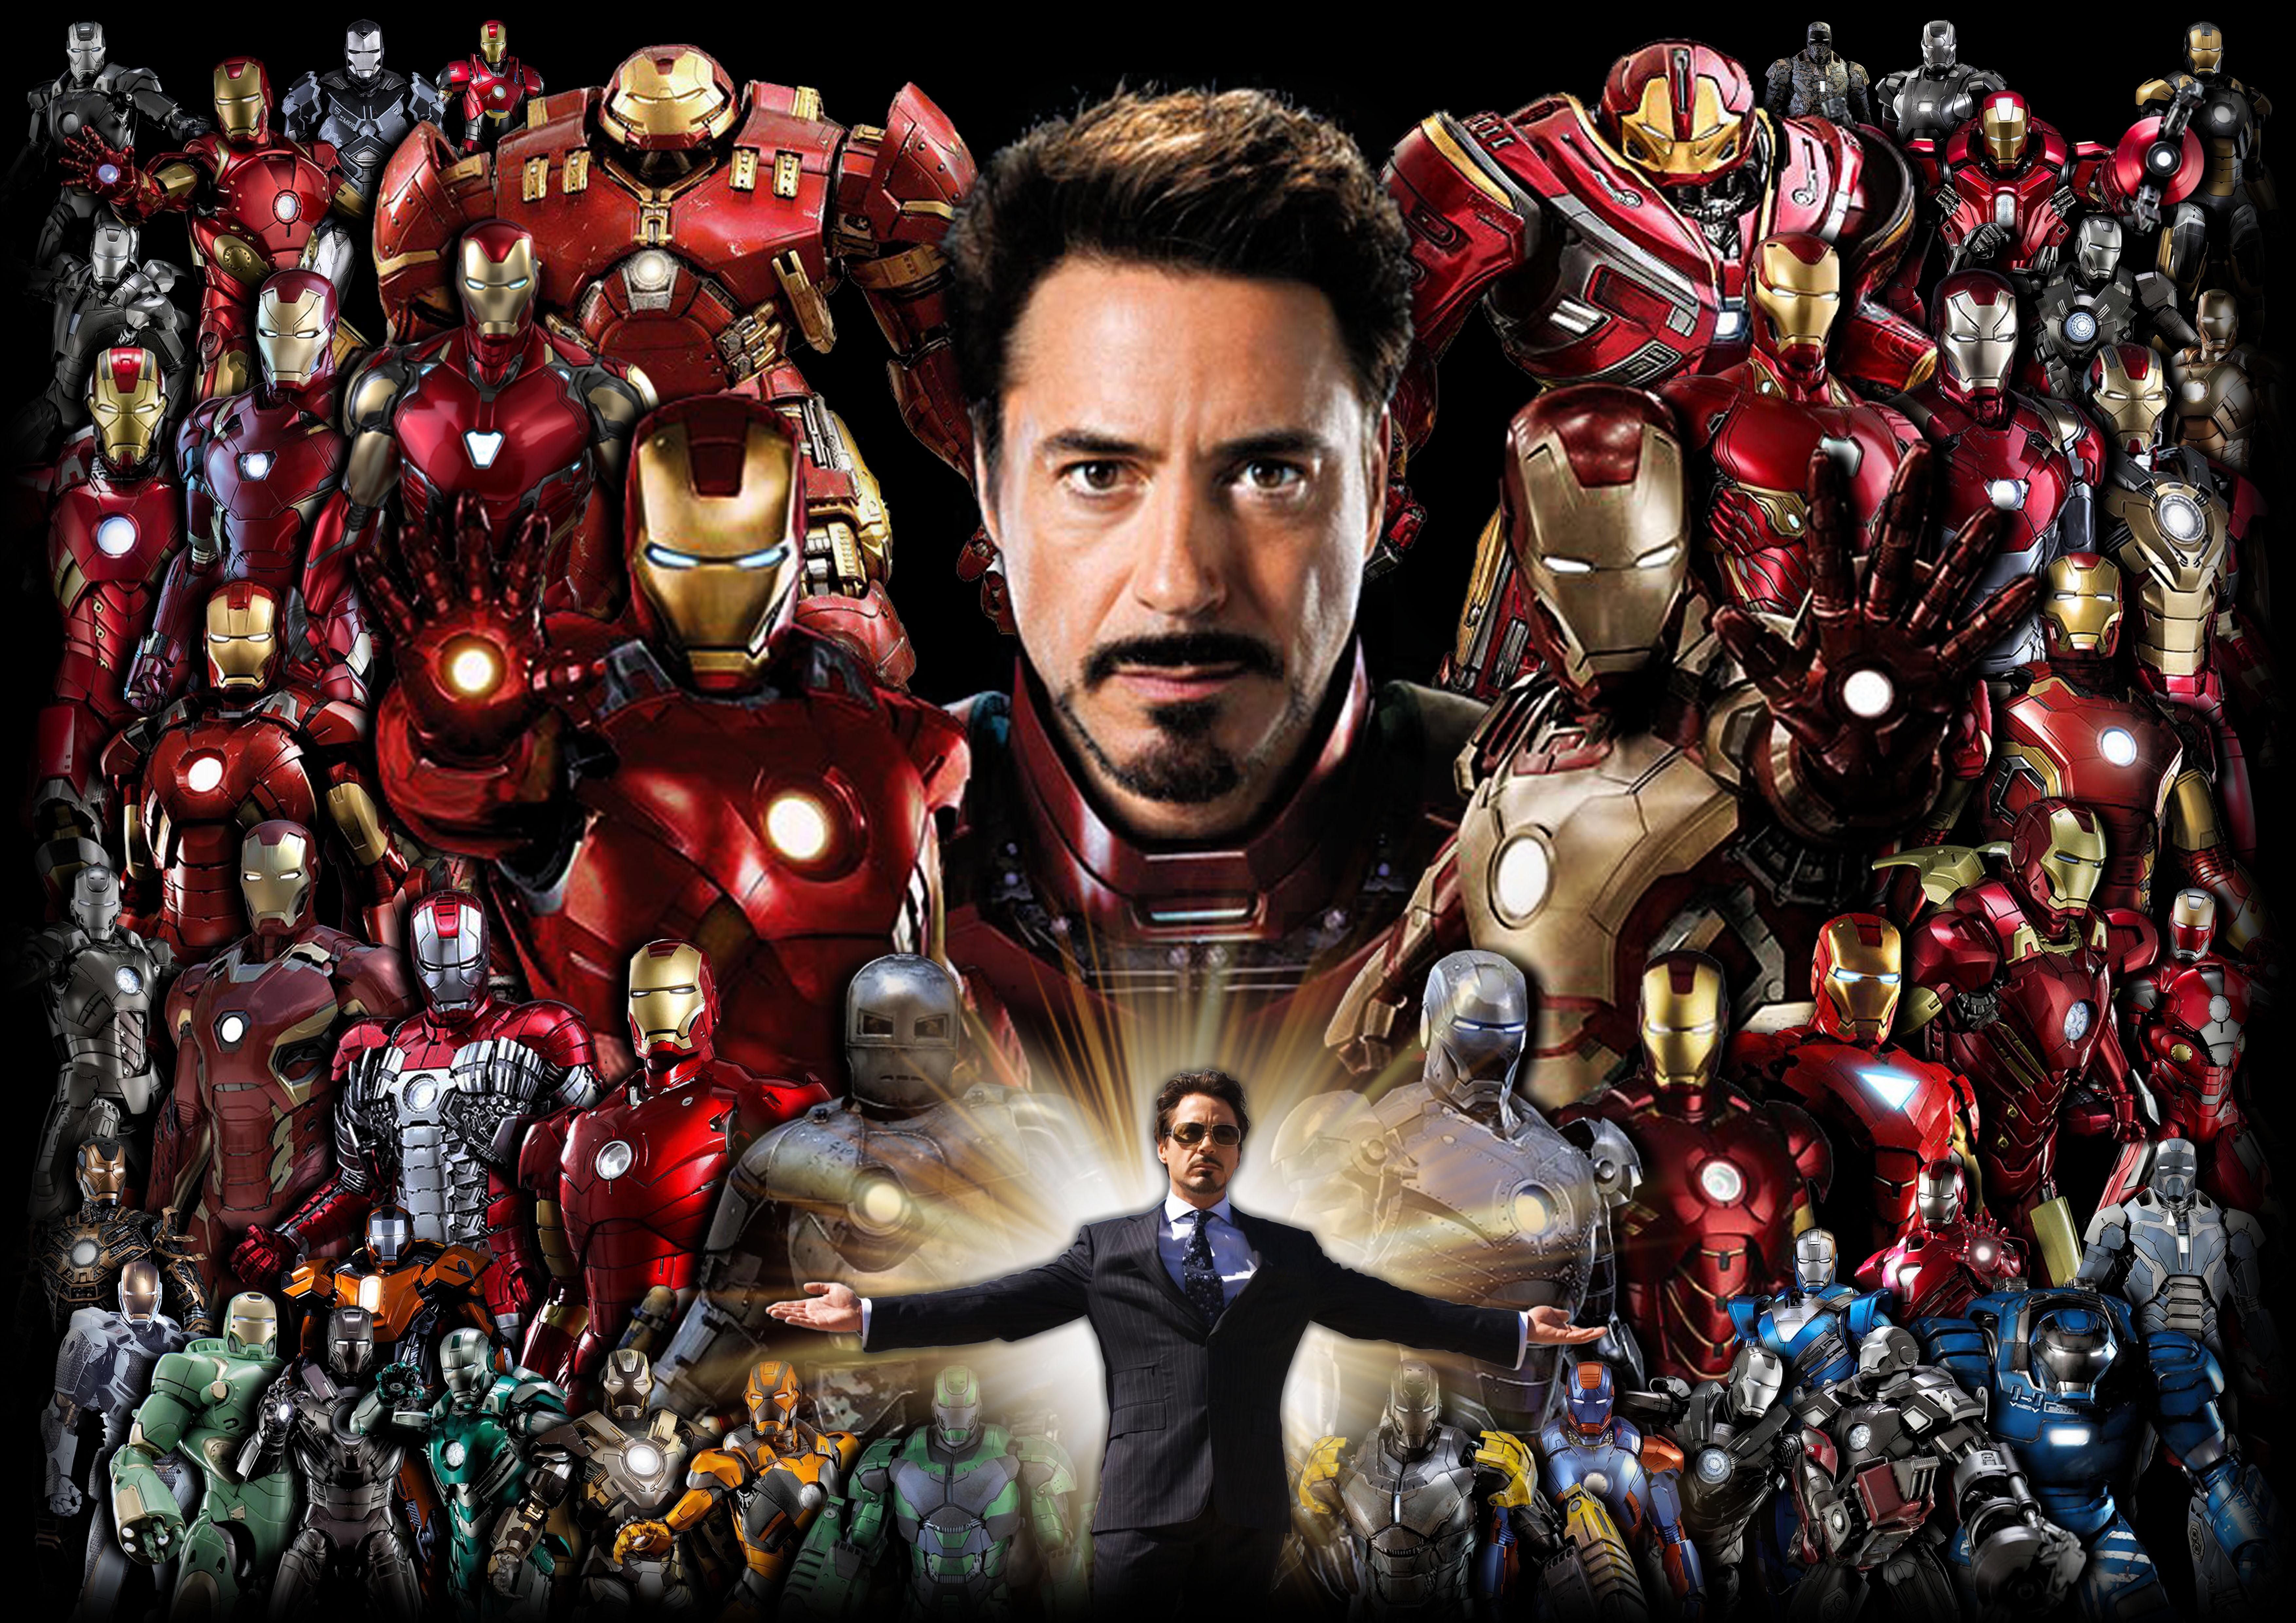 Made this MCU Iron Man poster will all suits.